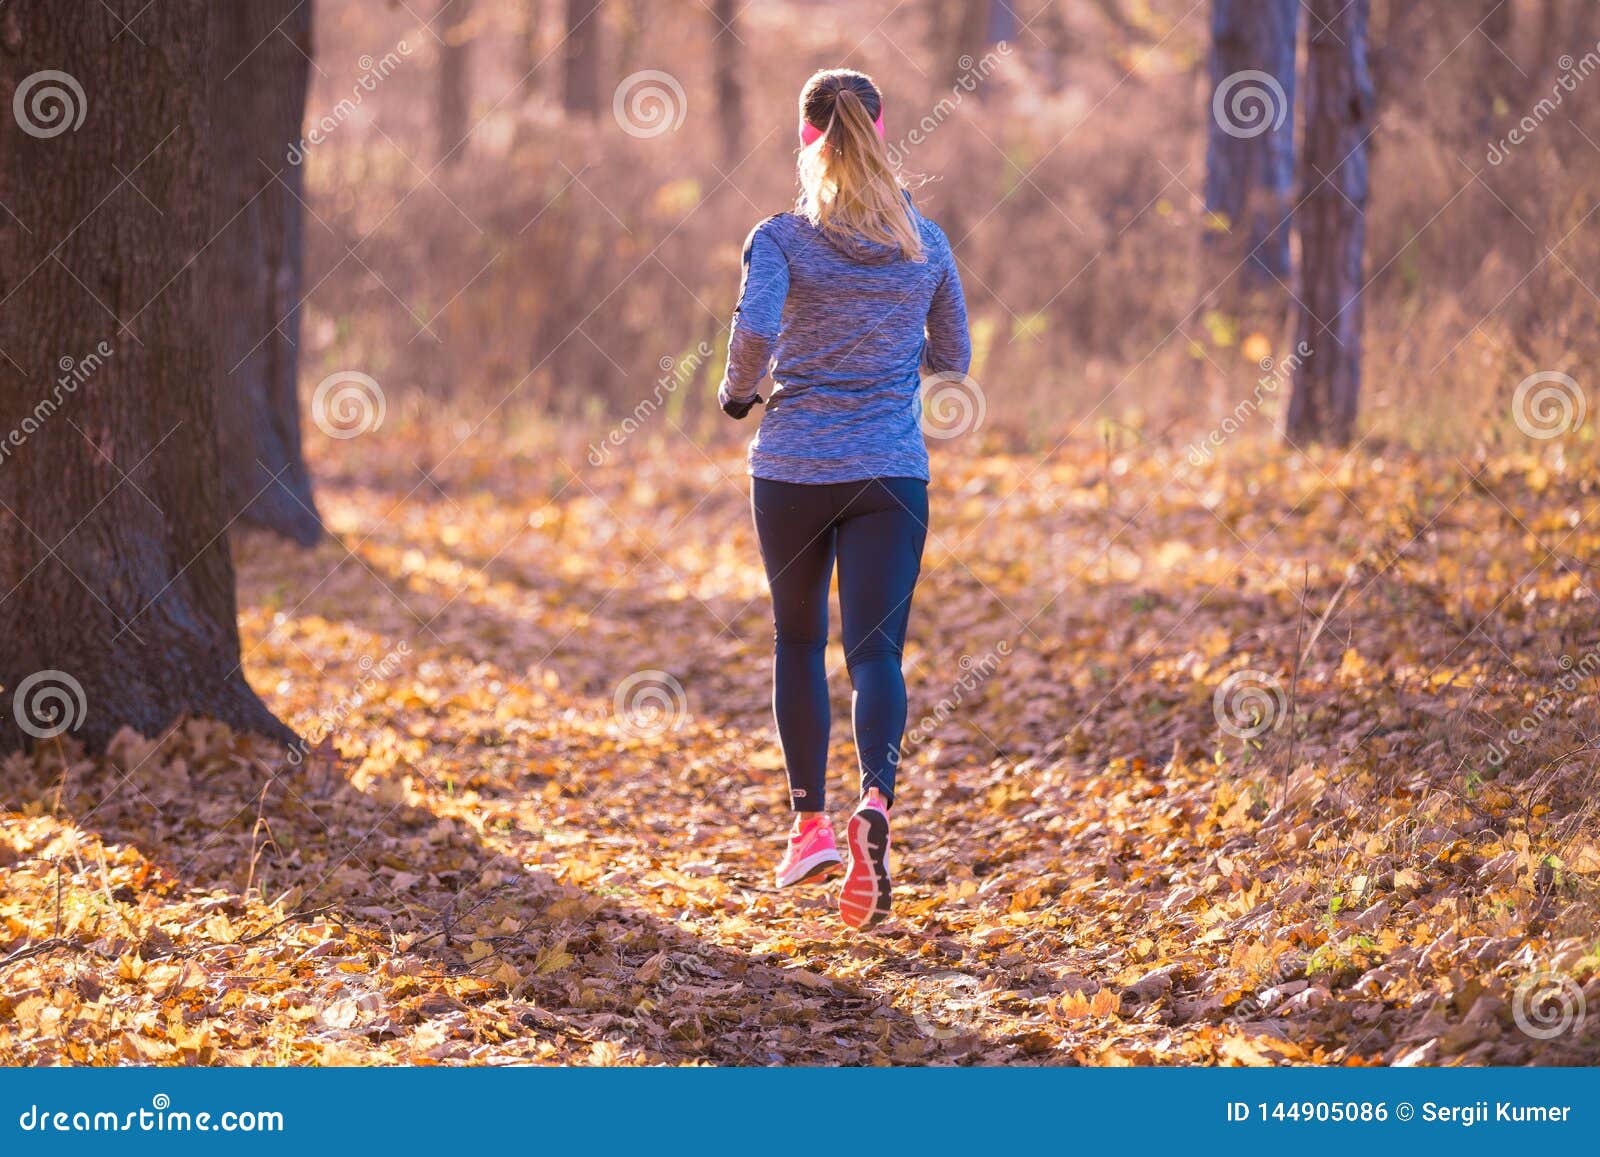 Back View of Running Girl in Autumn Park. Stock Photo - Image of ...